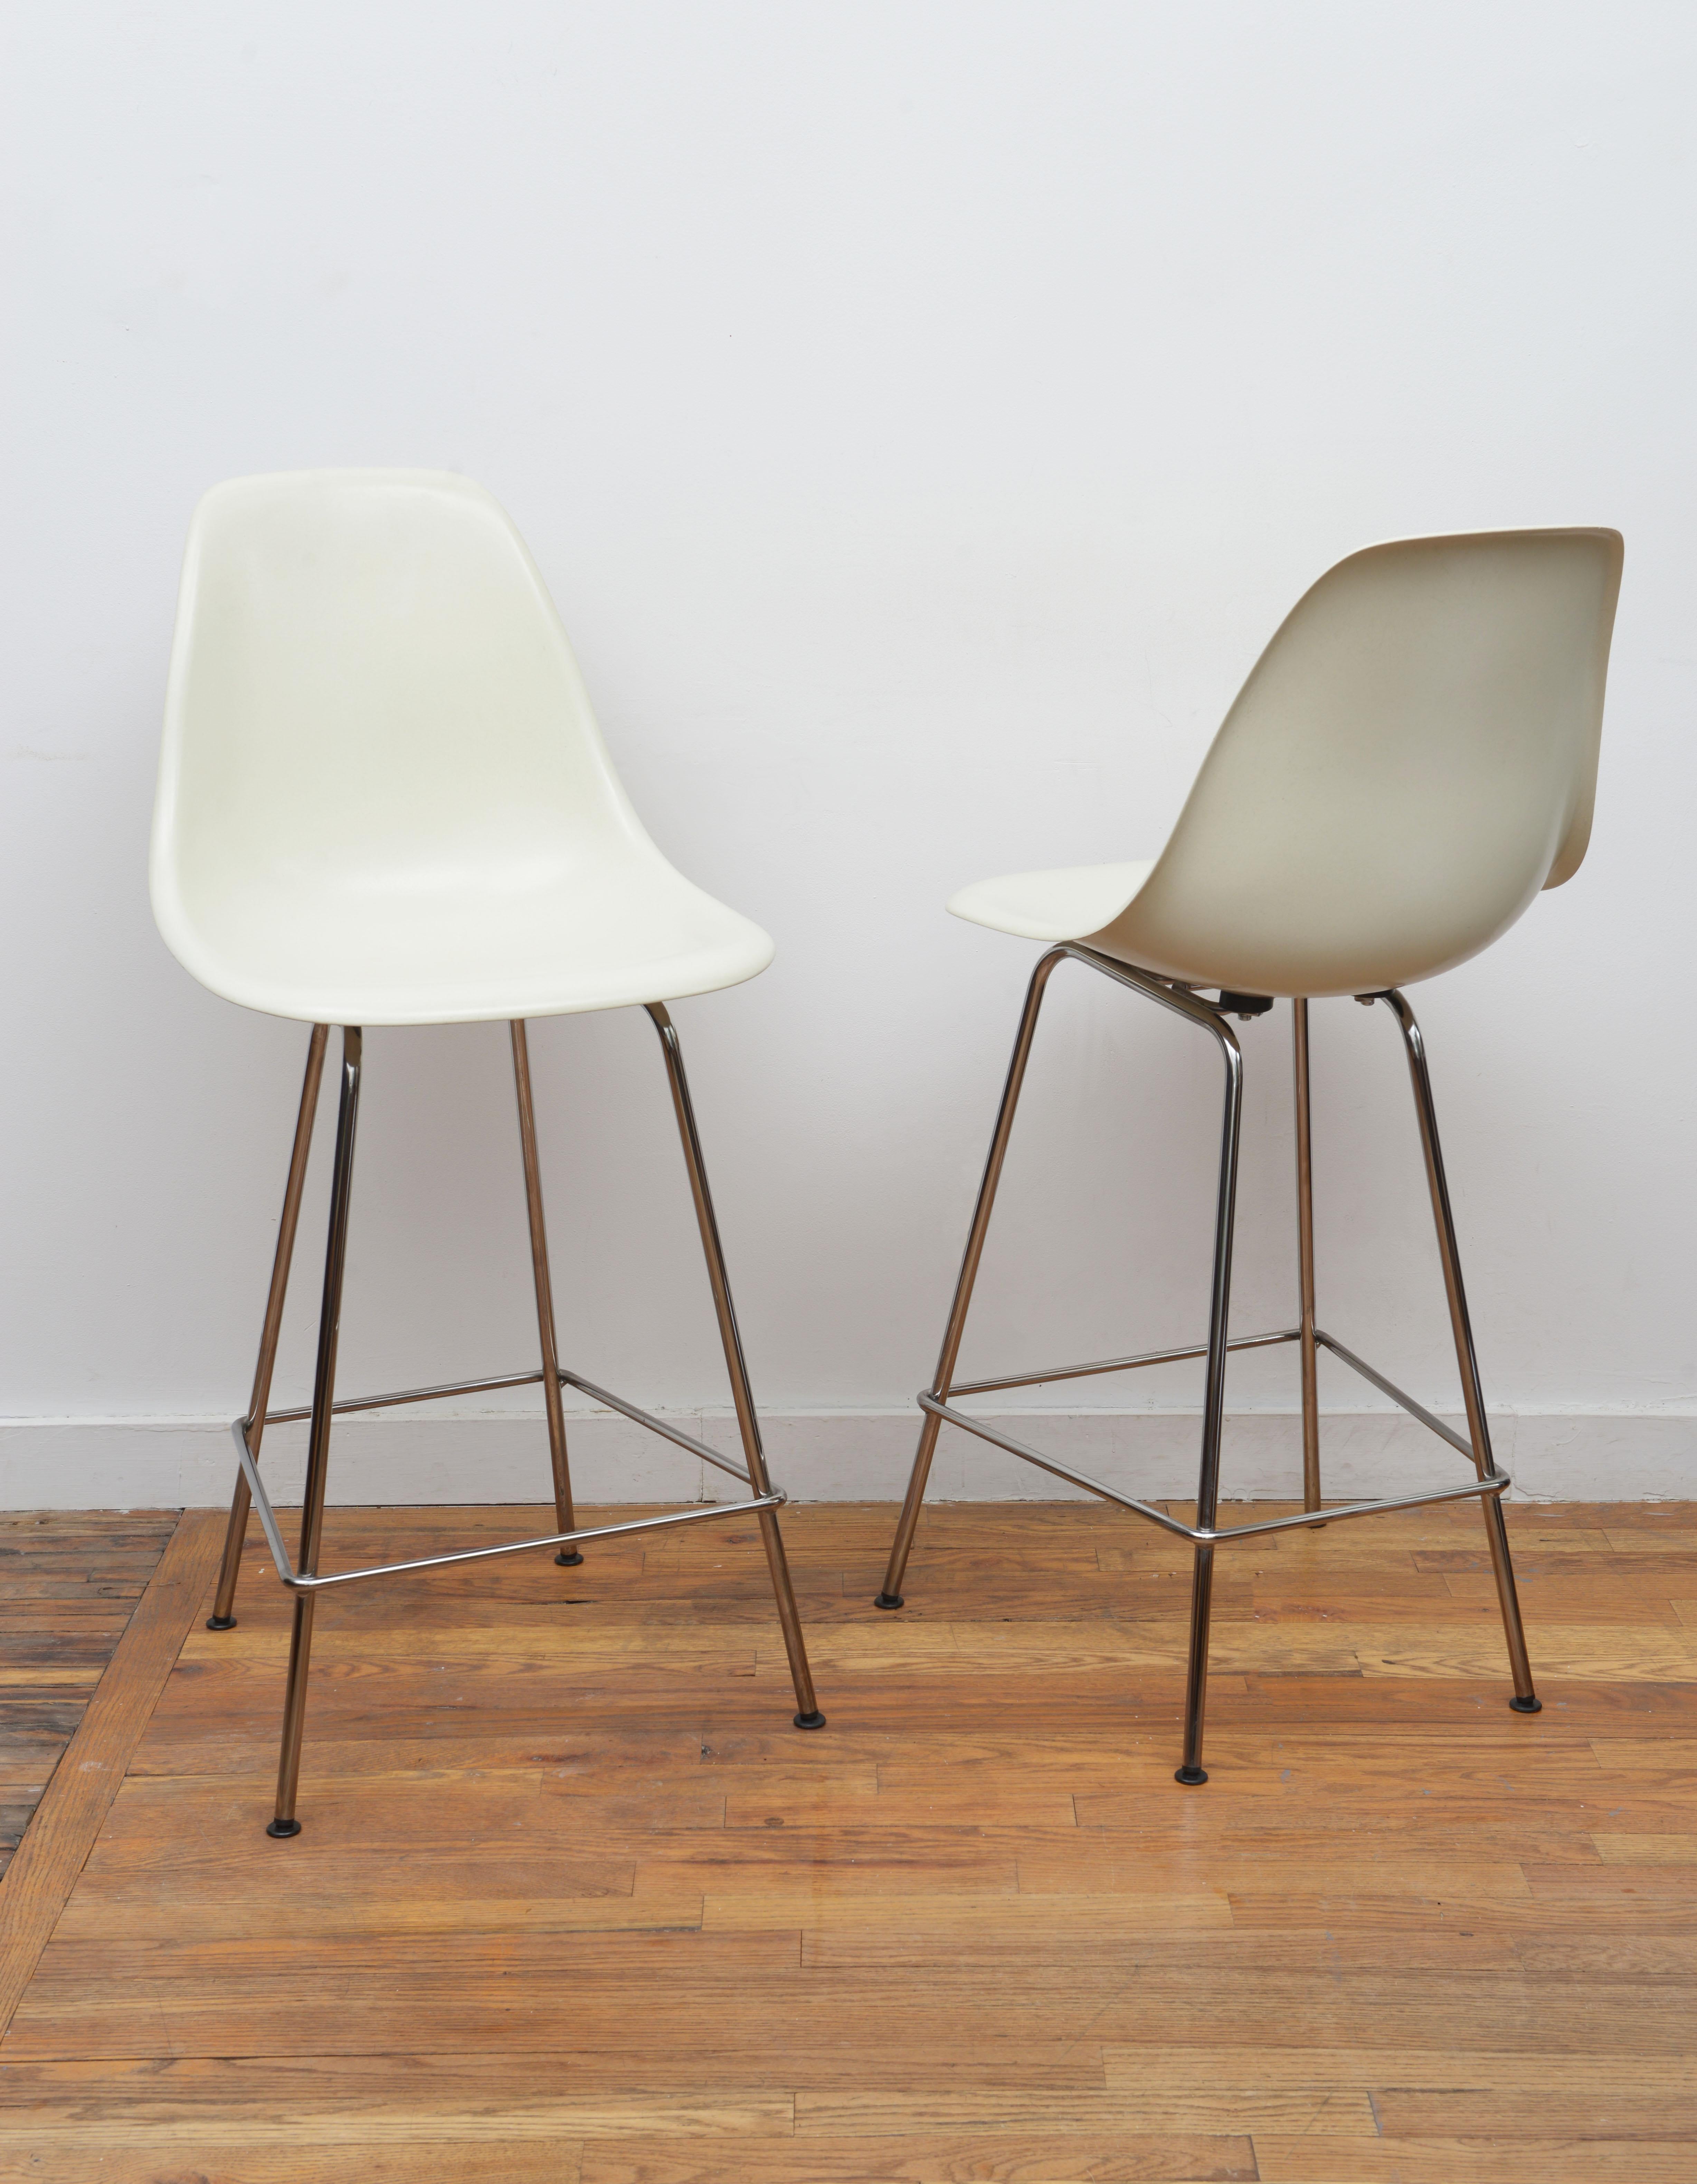 One iconic pair of white molded plastic bar stools by Charles & Ray Eames for Herman Miller, 2010. These beautiful stools were very lightly used. The perfect combination of comfort and style featuring white molded seats with chromes steel legs. Both